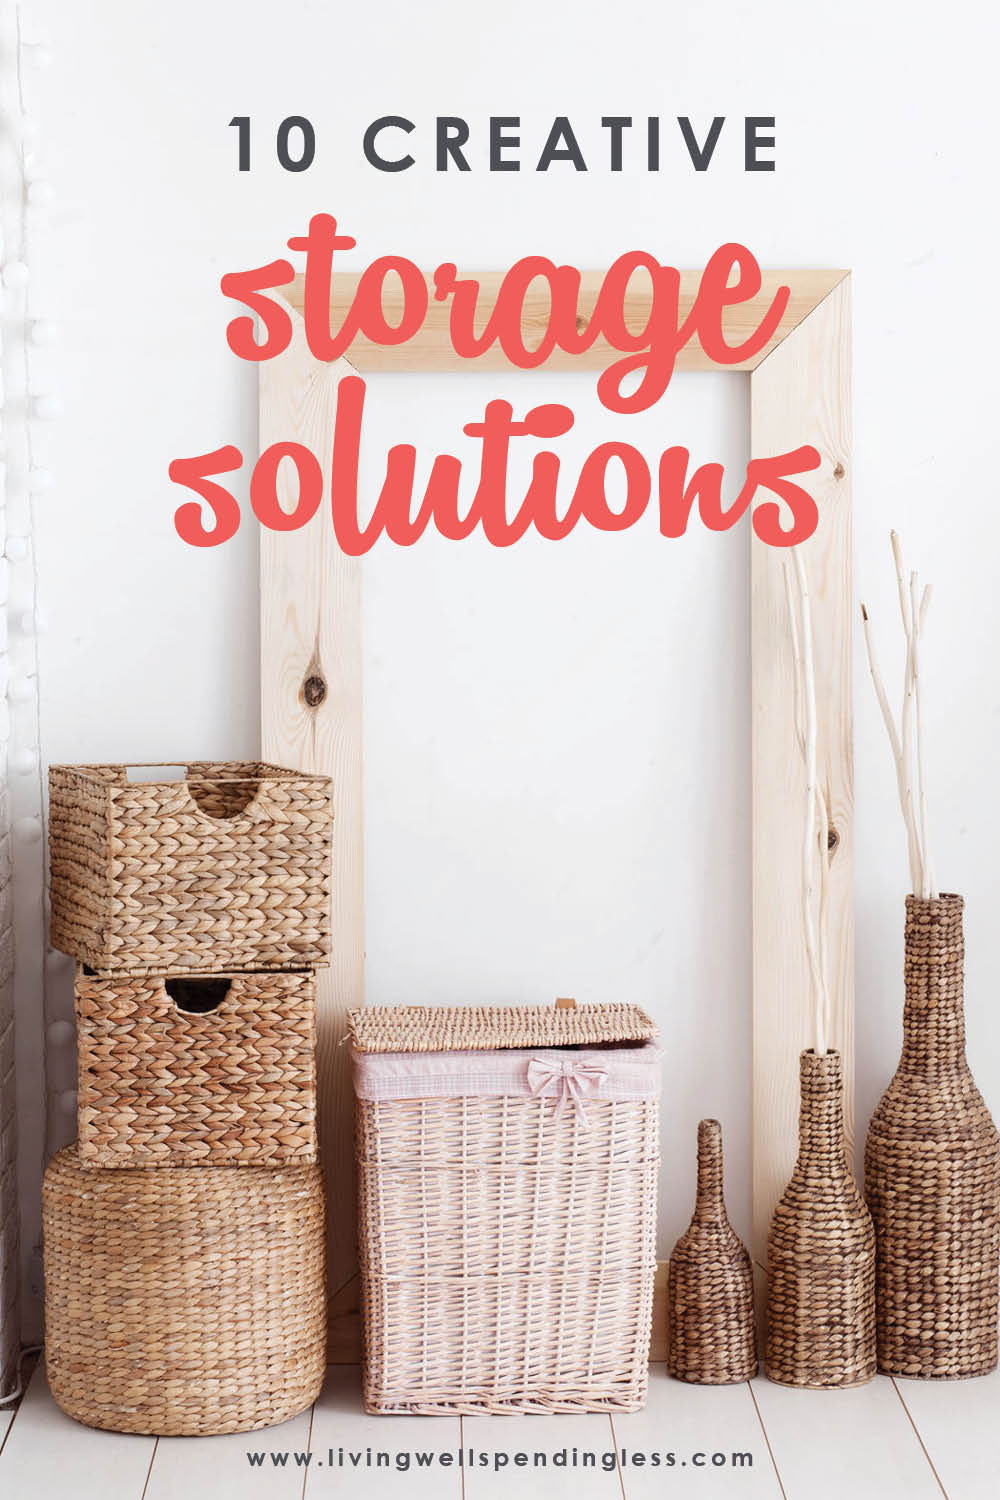 Creative Storage Solutions for Accessories, Home Storage and